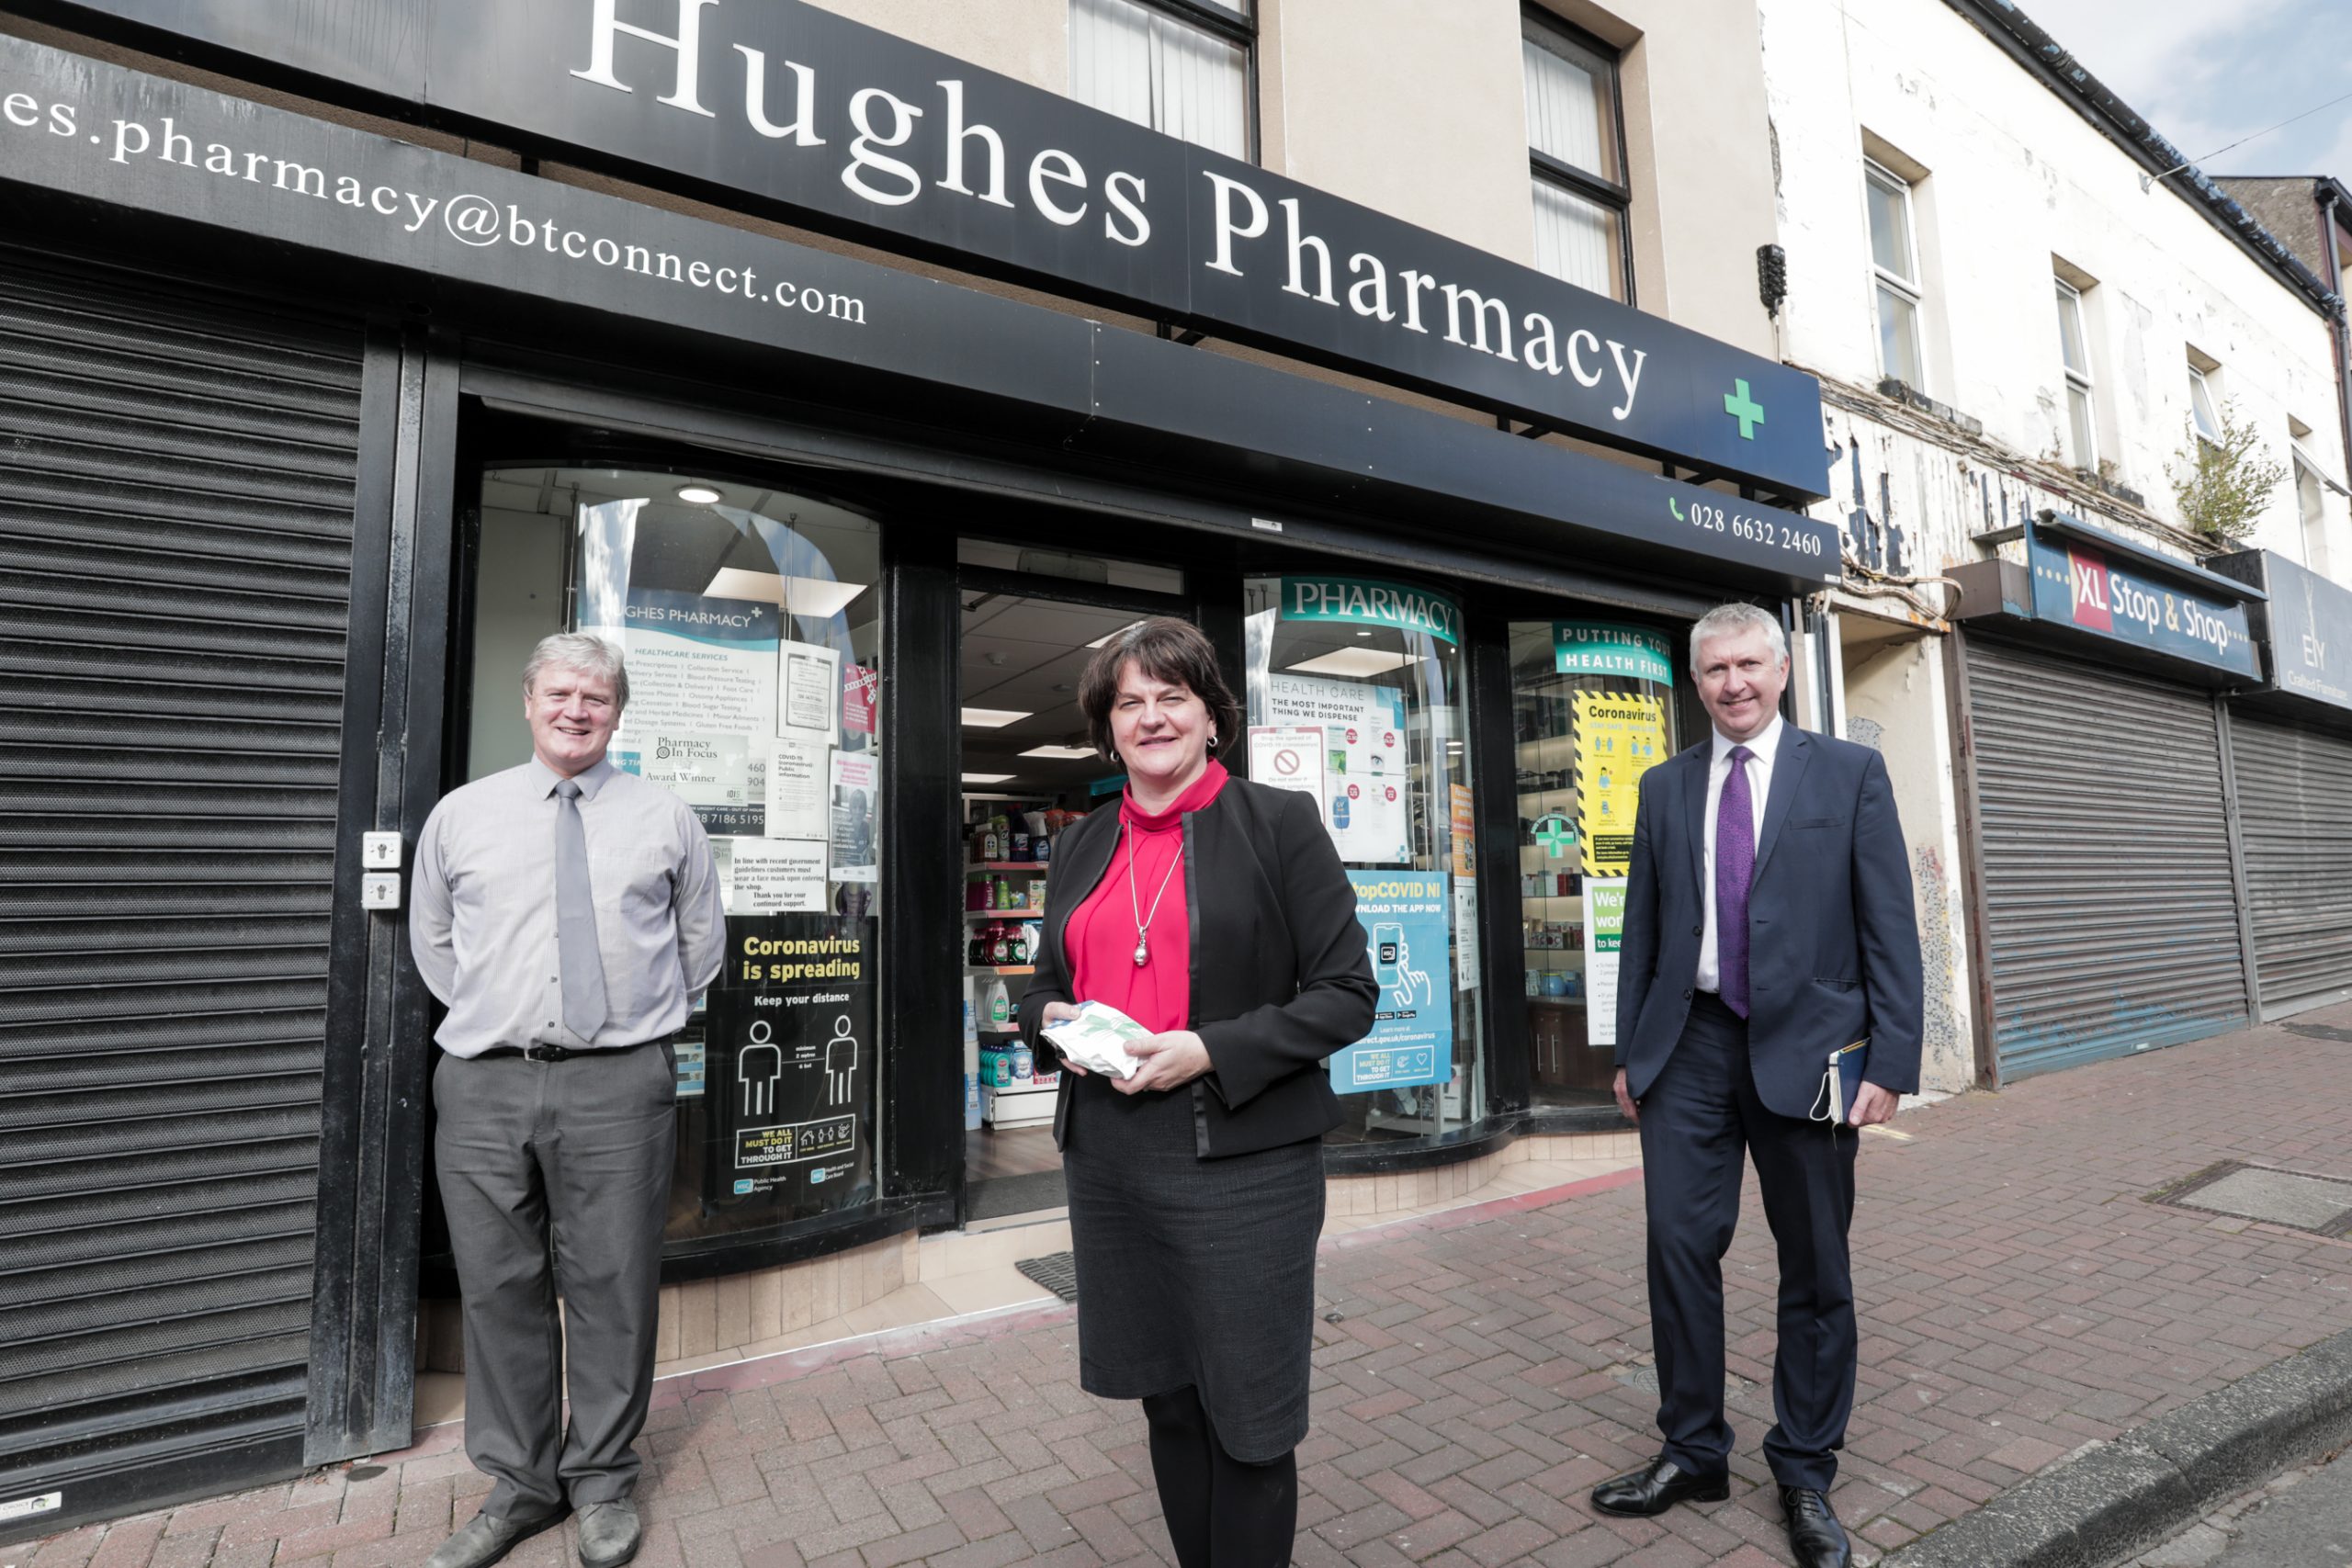 First Minister pays tribute to continued dedication of community pharmacy workforce at pharmacy visit